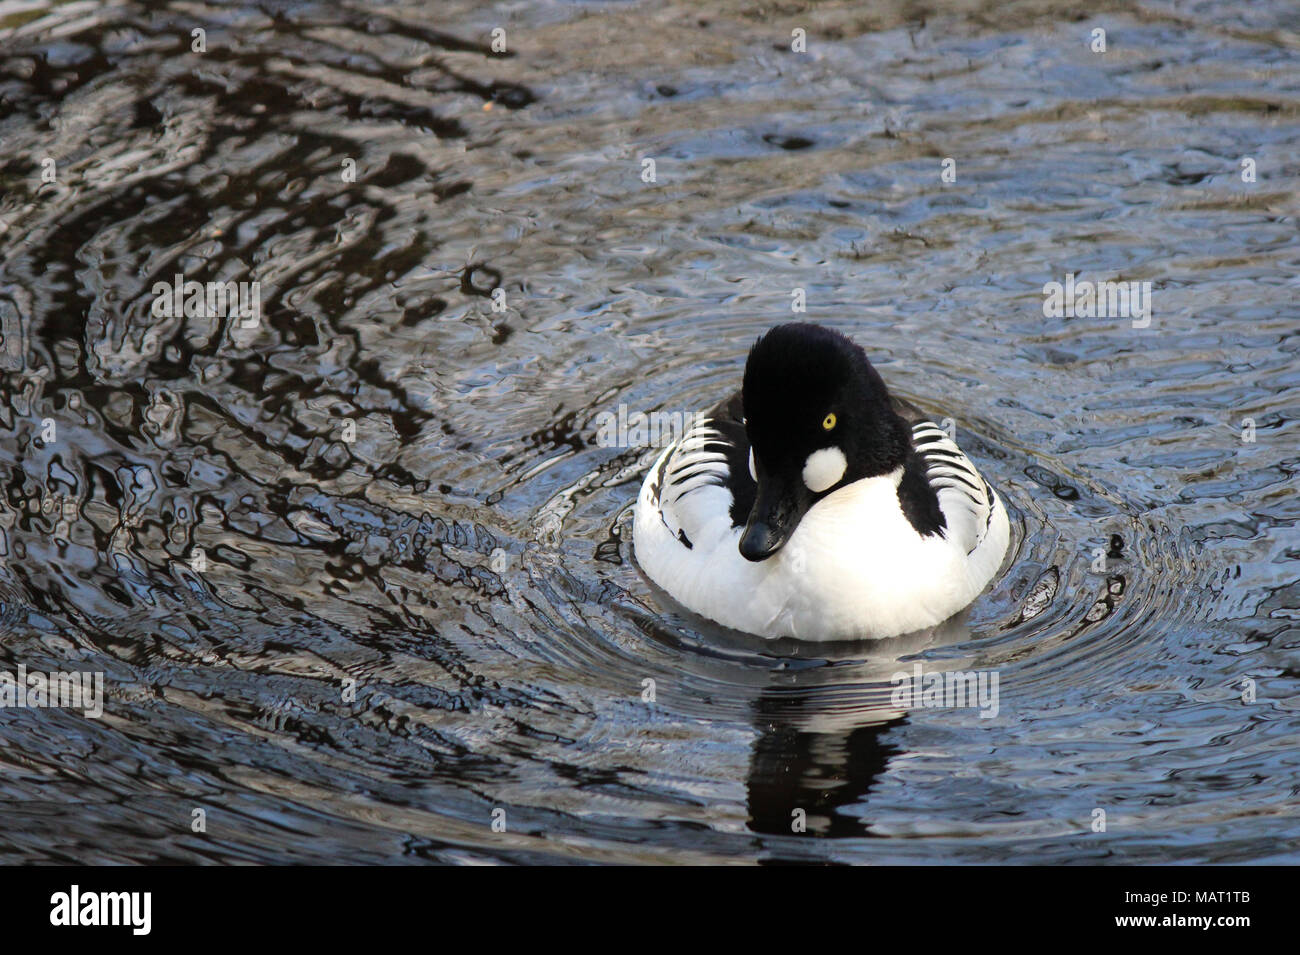 Black and White Duck Stock Photo